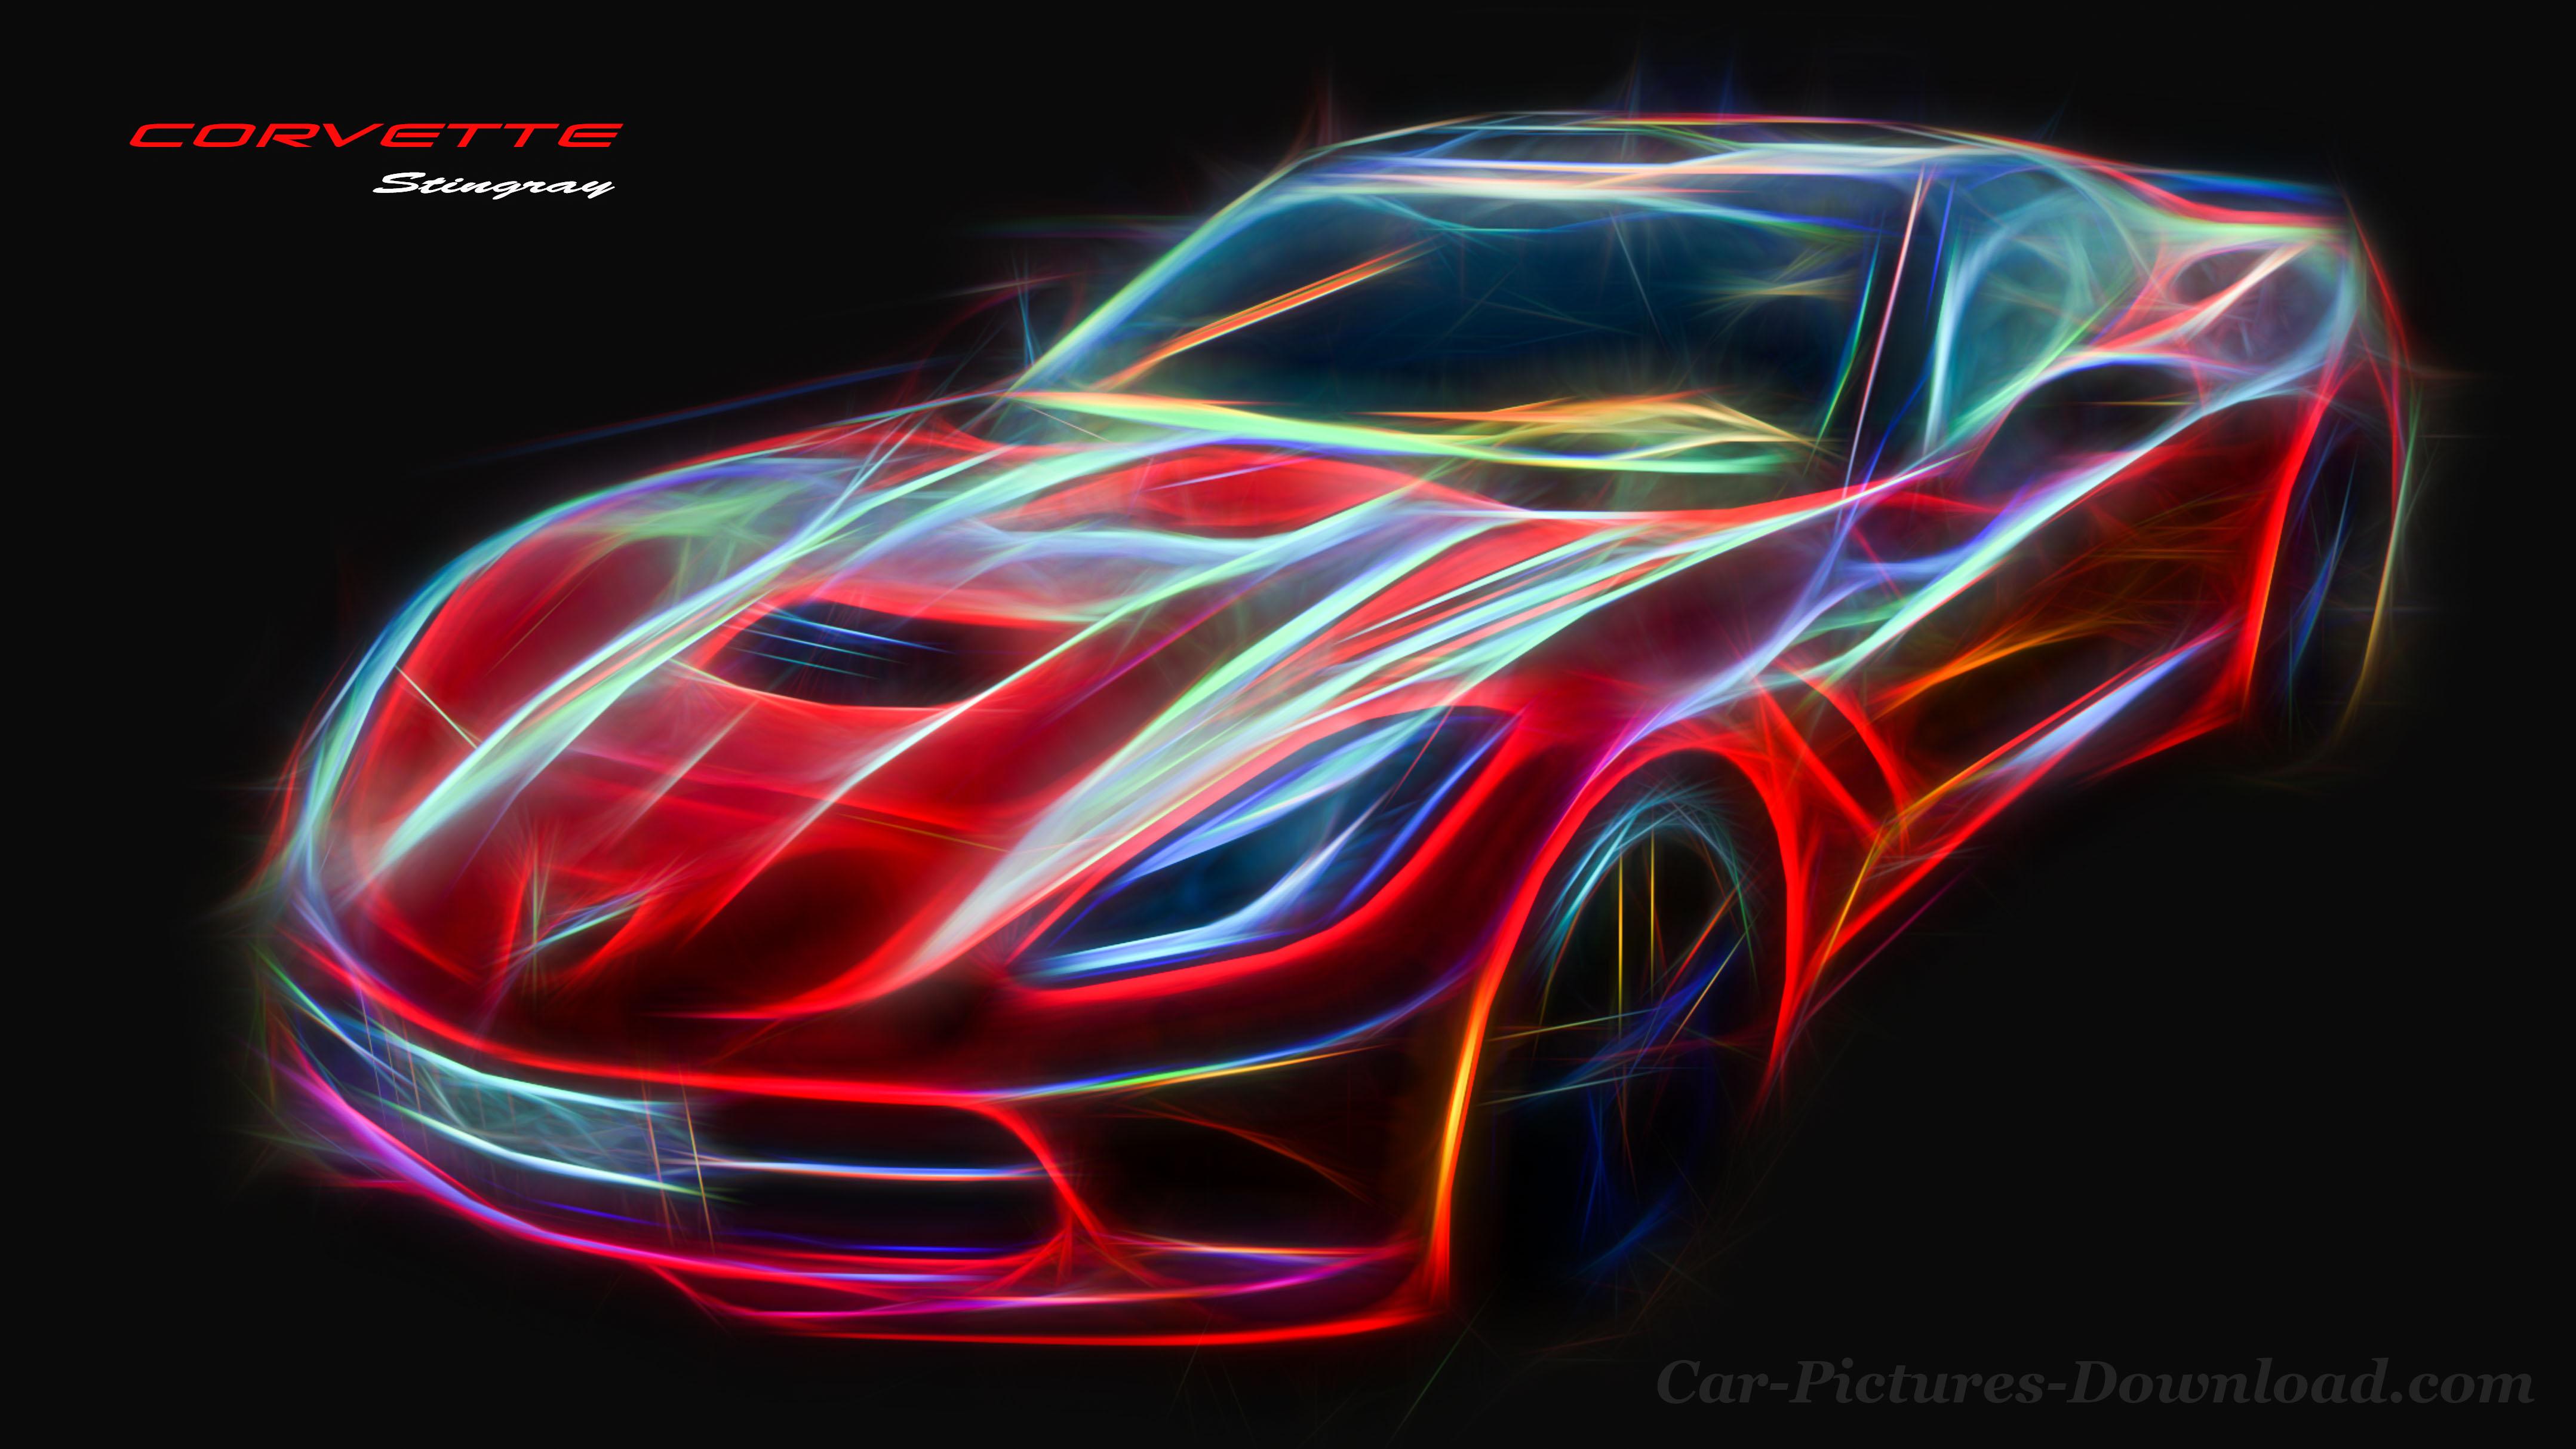 Corvette Wallpaper For All Devices Quality And Free